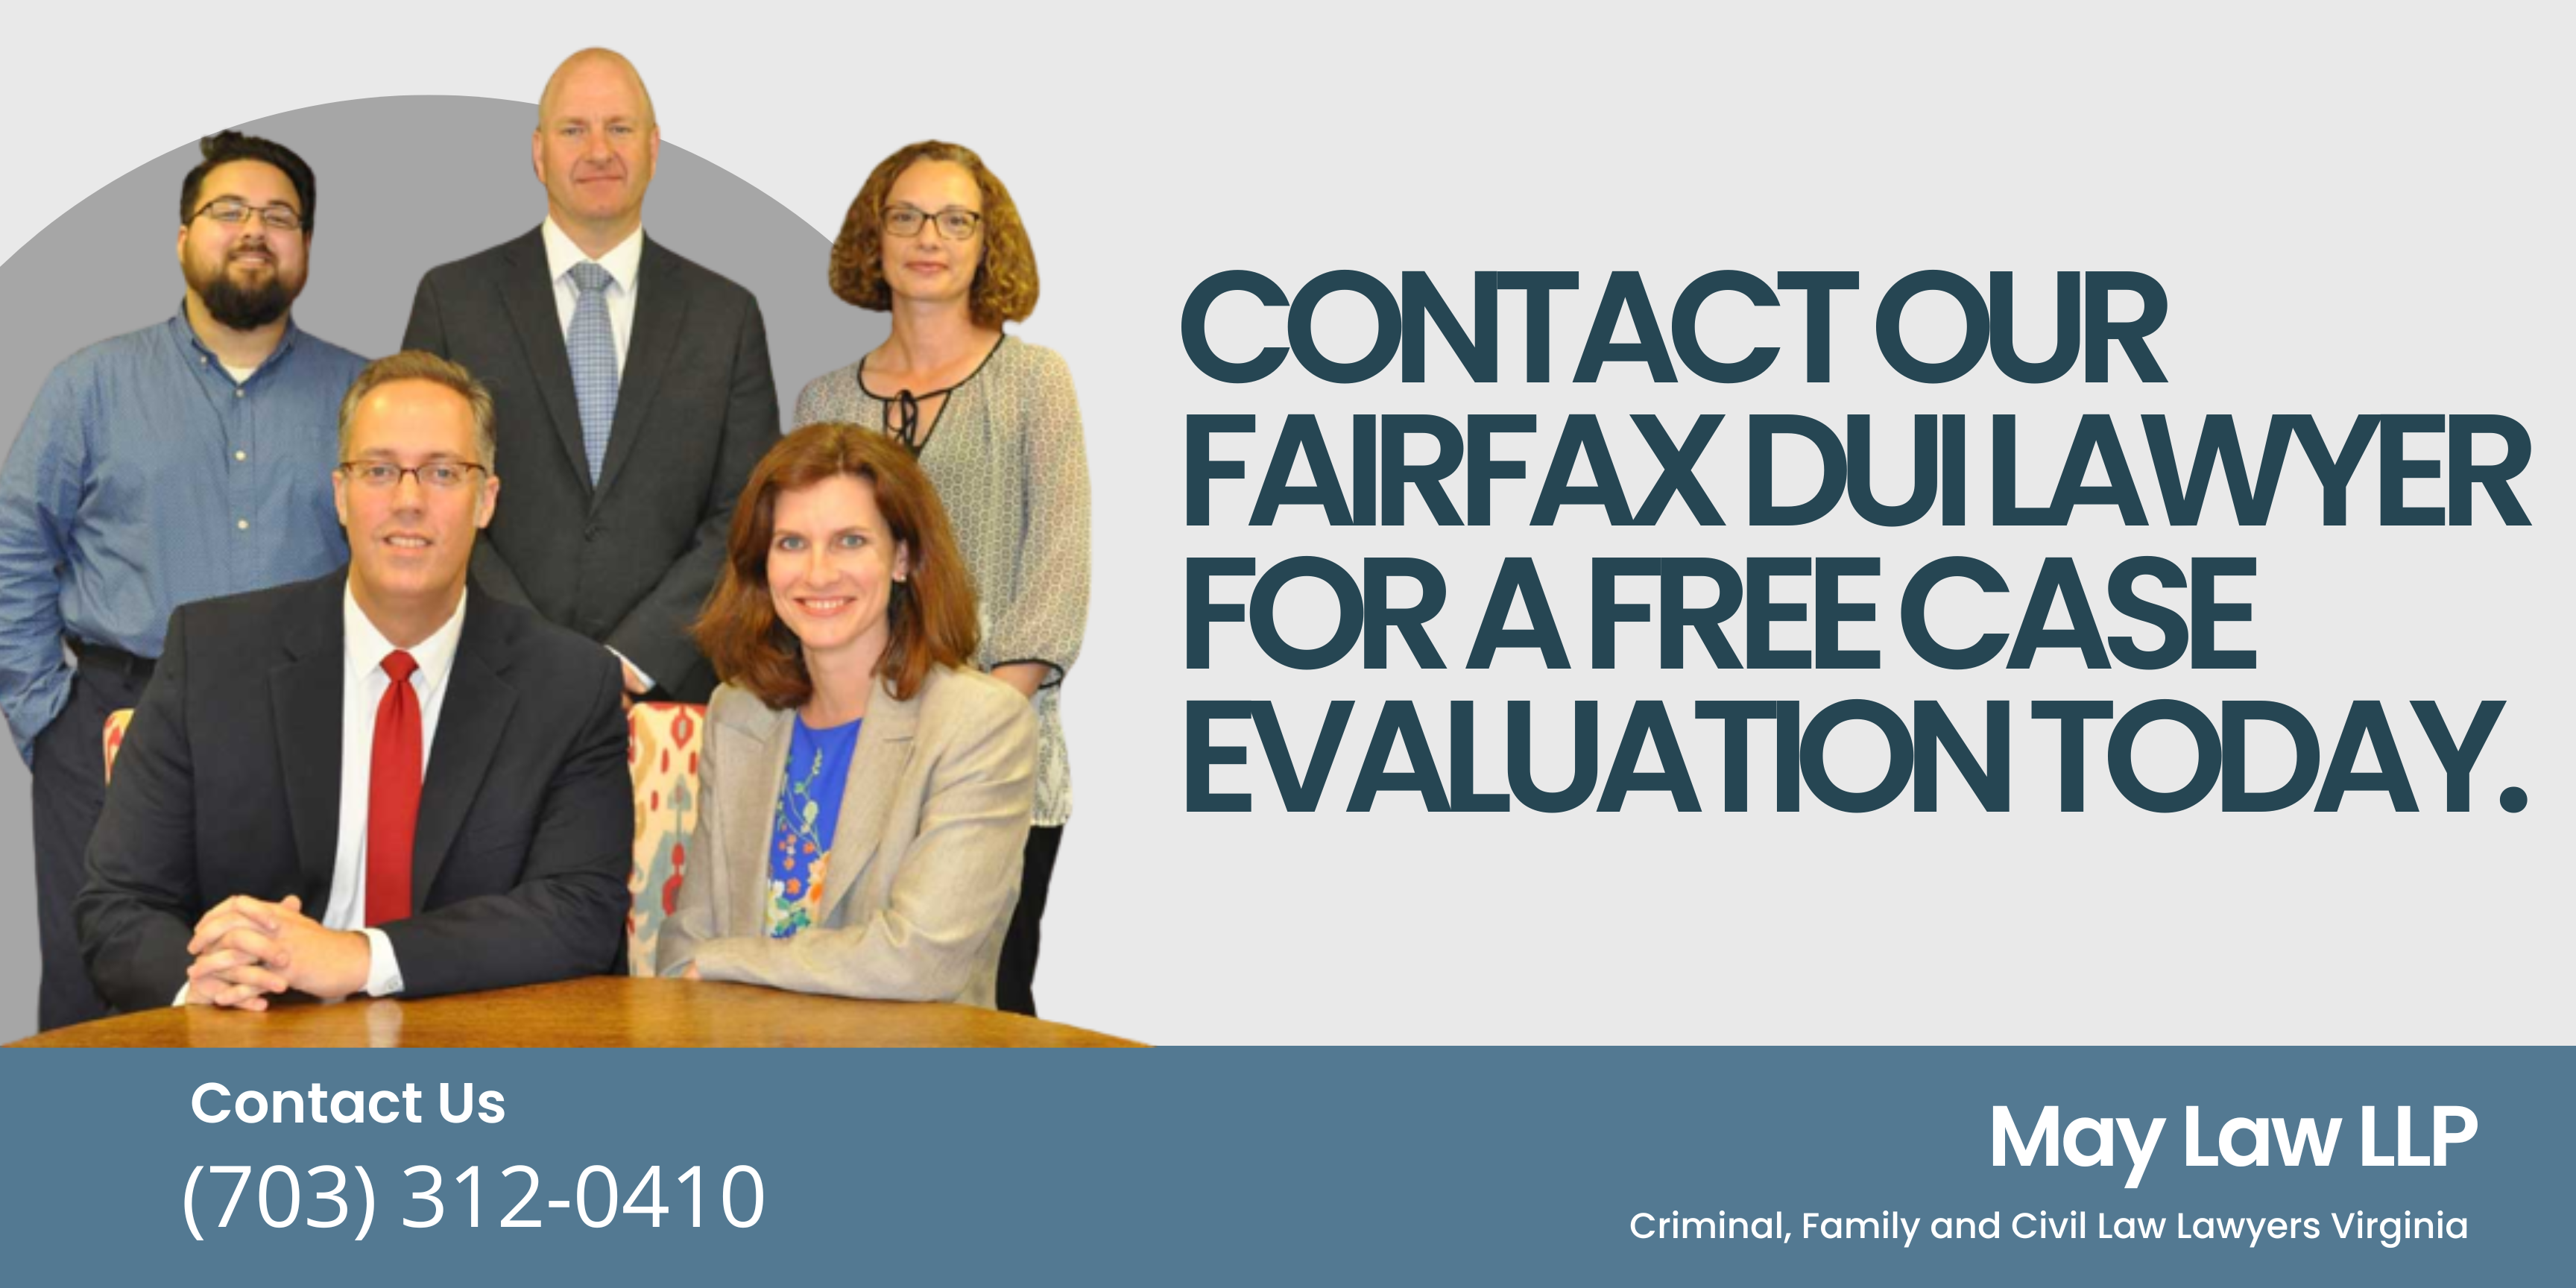 Contact Our Fairfax DUI Lawyer